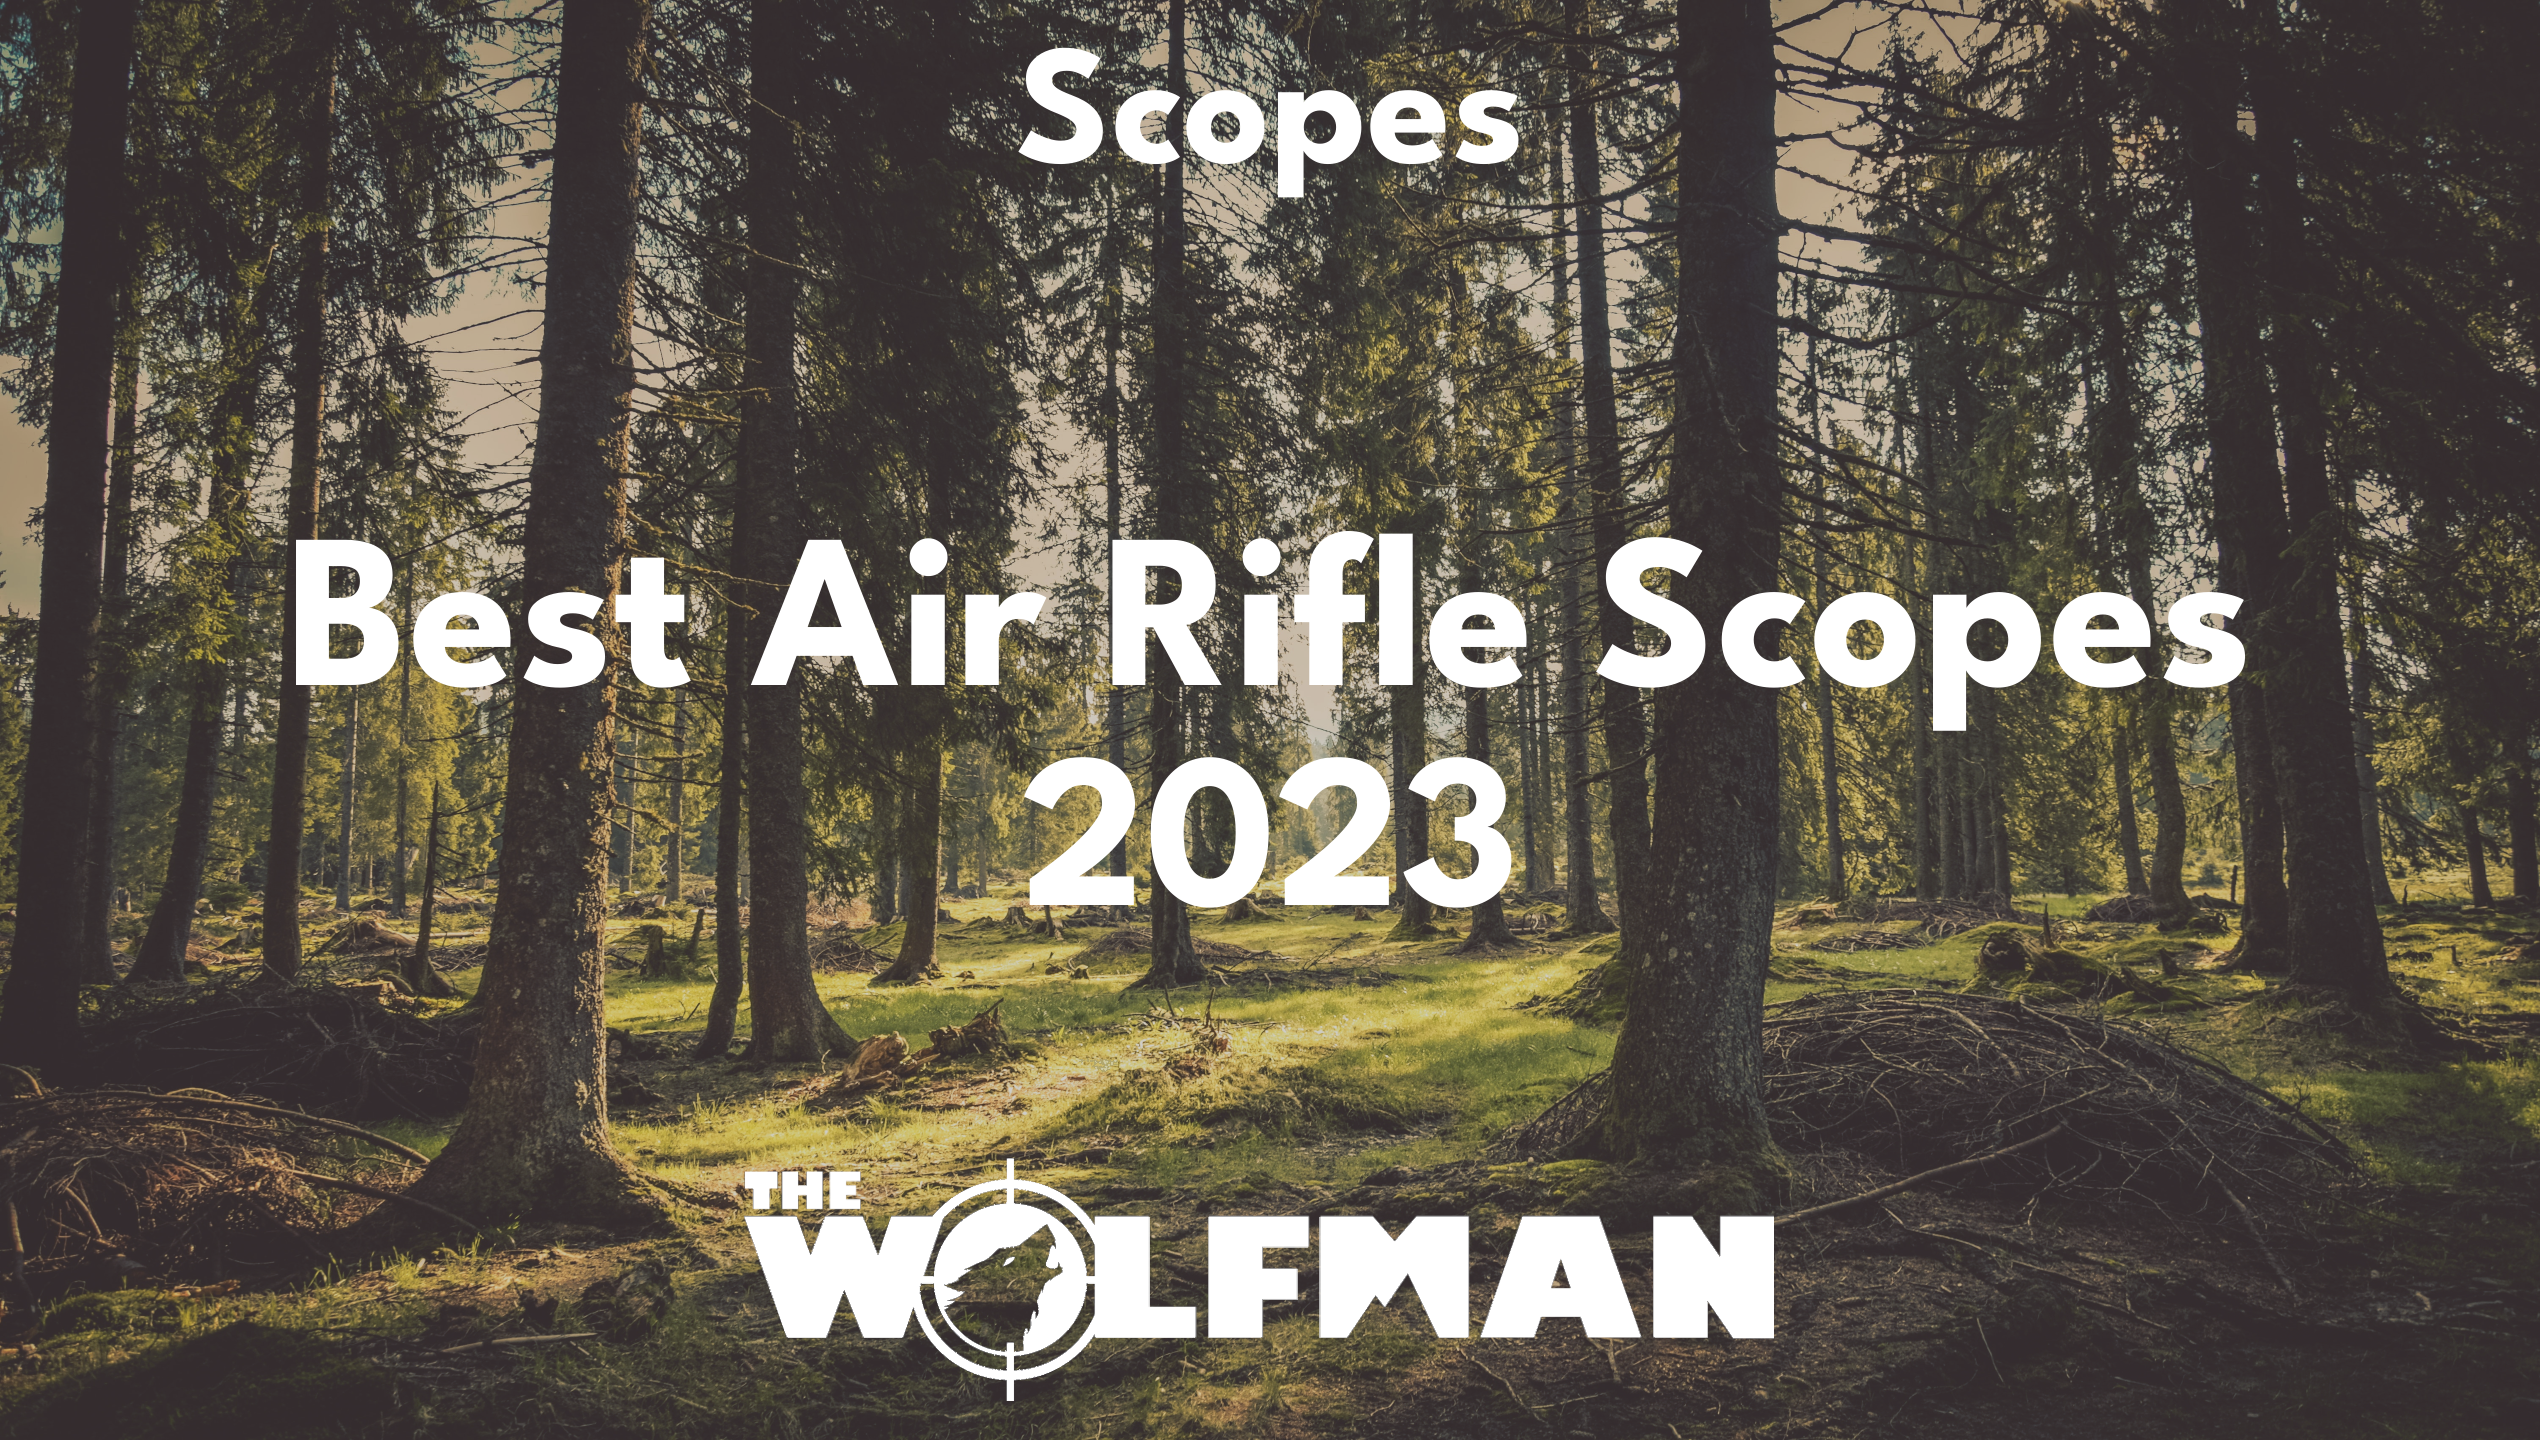 Best Air Rifle Scopes 2023 — The Wolfman